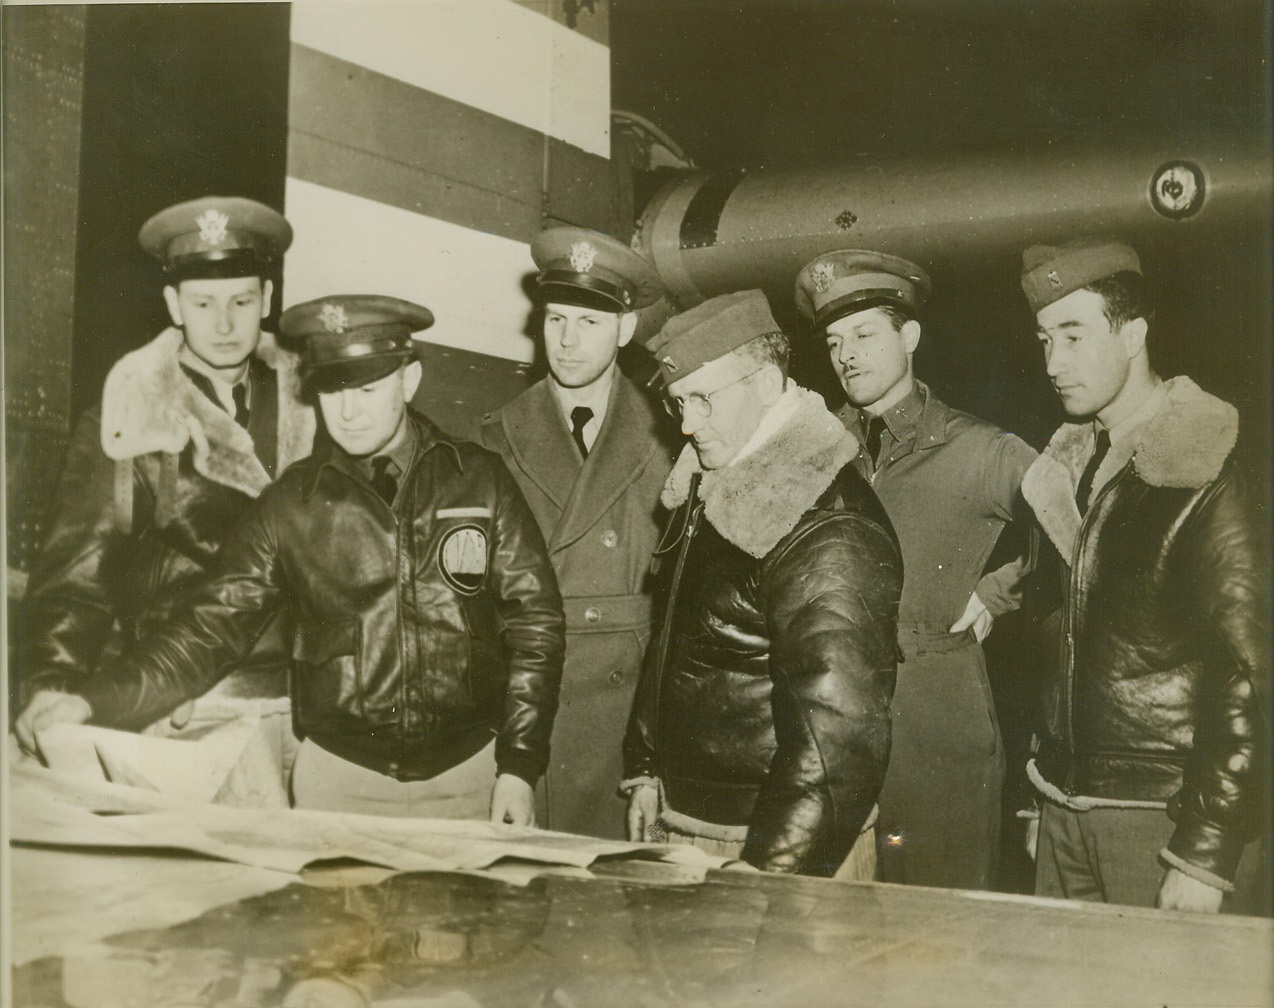 Test “Flying Fortress” Endurance, 1/5/41  DAYTON, OHIO – Crew of Boeing B 17 army bomber checking route of 15 hour 3000 mile endurance test, longest nonstop non refueling flight ever attempted by army air force, shortly before take-off from Patterson field at Dayton, Ohio. Left to right: Lieut. G.E. Glober, Lieut P.F. Davis, Lieut M.M. Munn, Sgt. H.A. Lindle, Capt. O.O. Benson, Sgt. E.W Meeker. Please credit “ACME”;